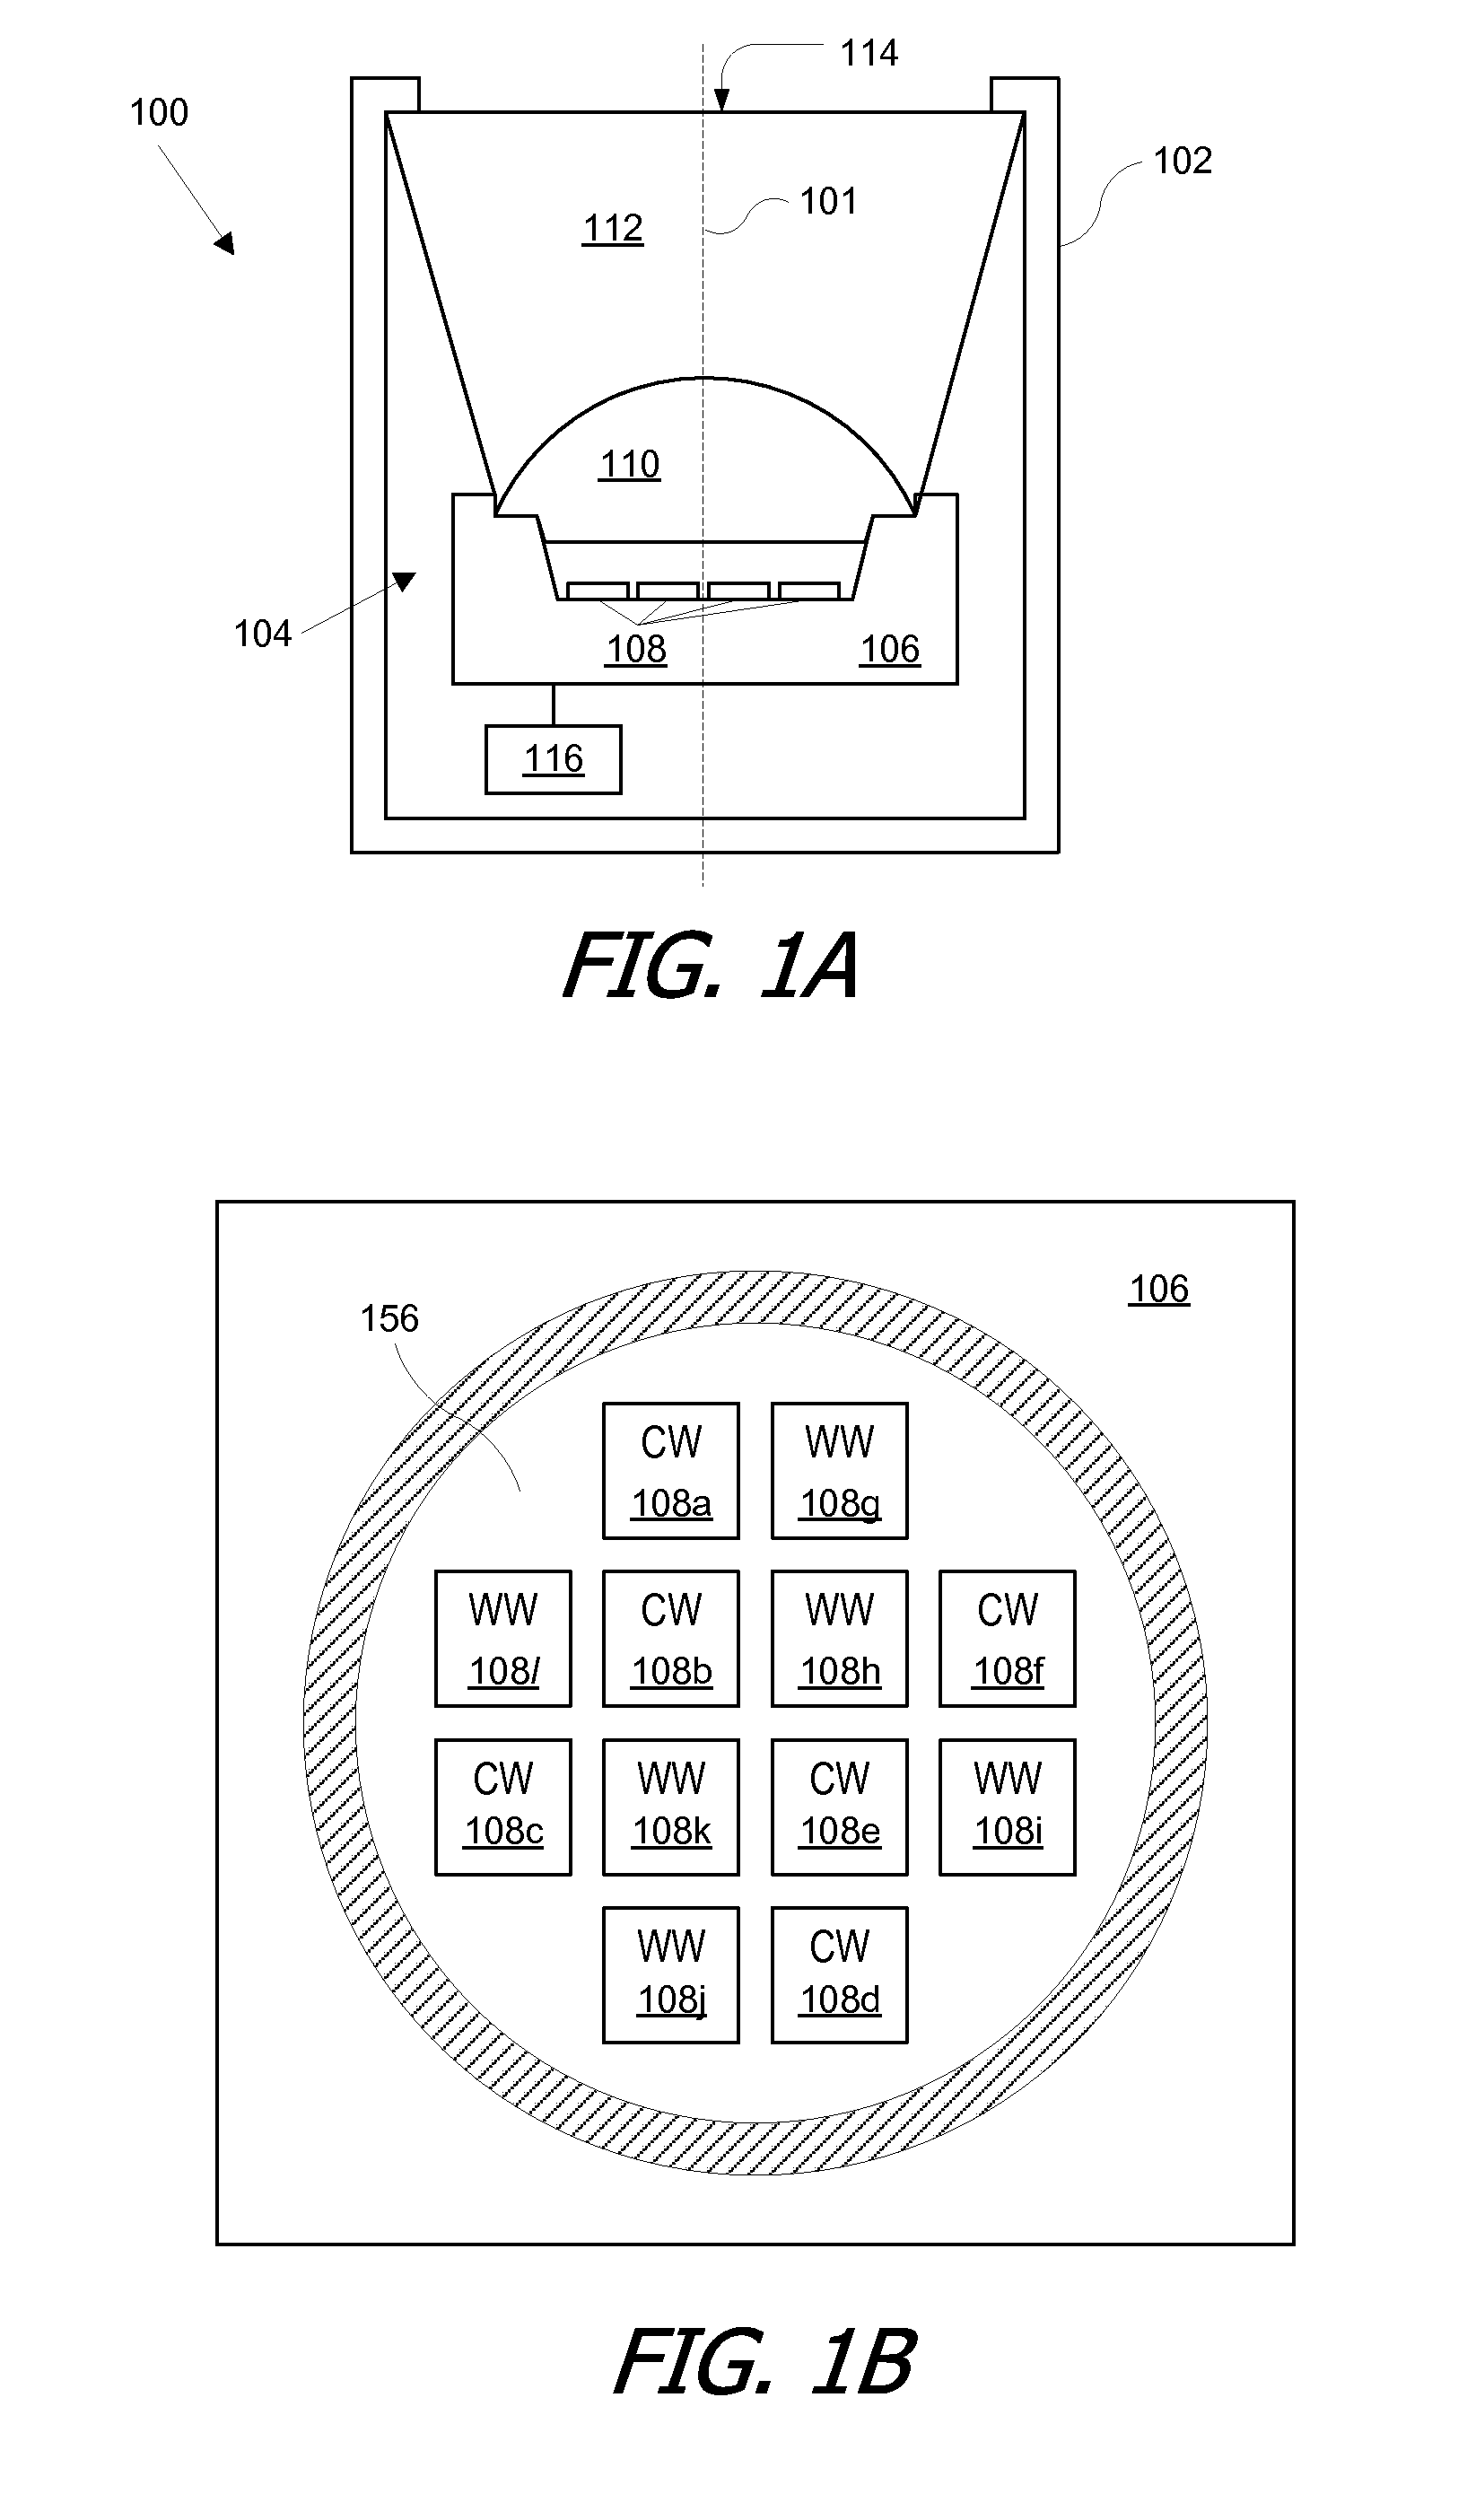 Apparatus for tuning of emitter with multiple leds to a single color bin